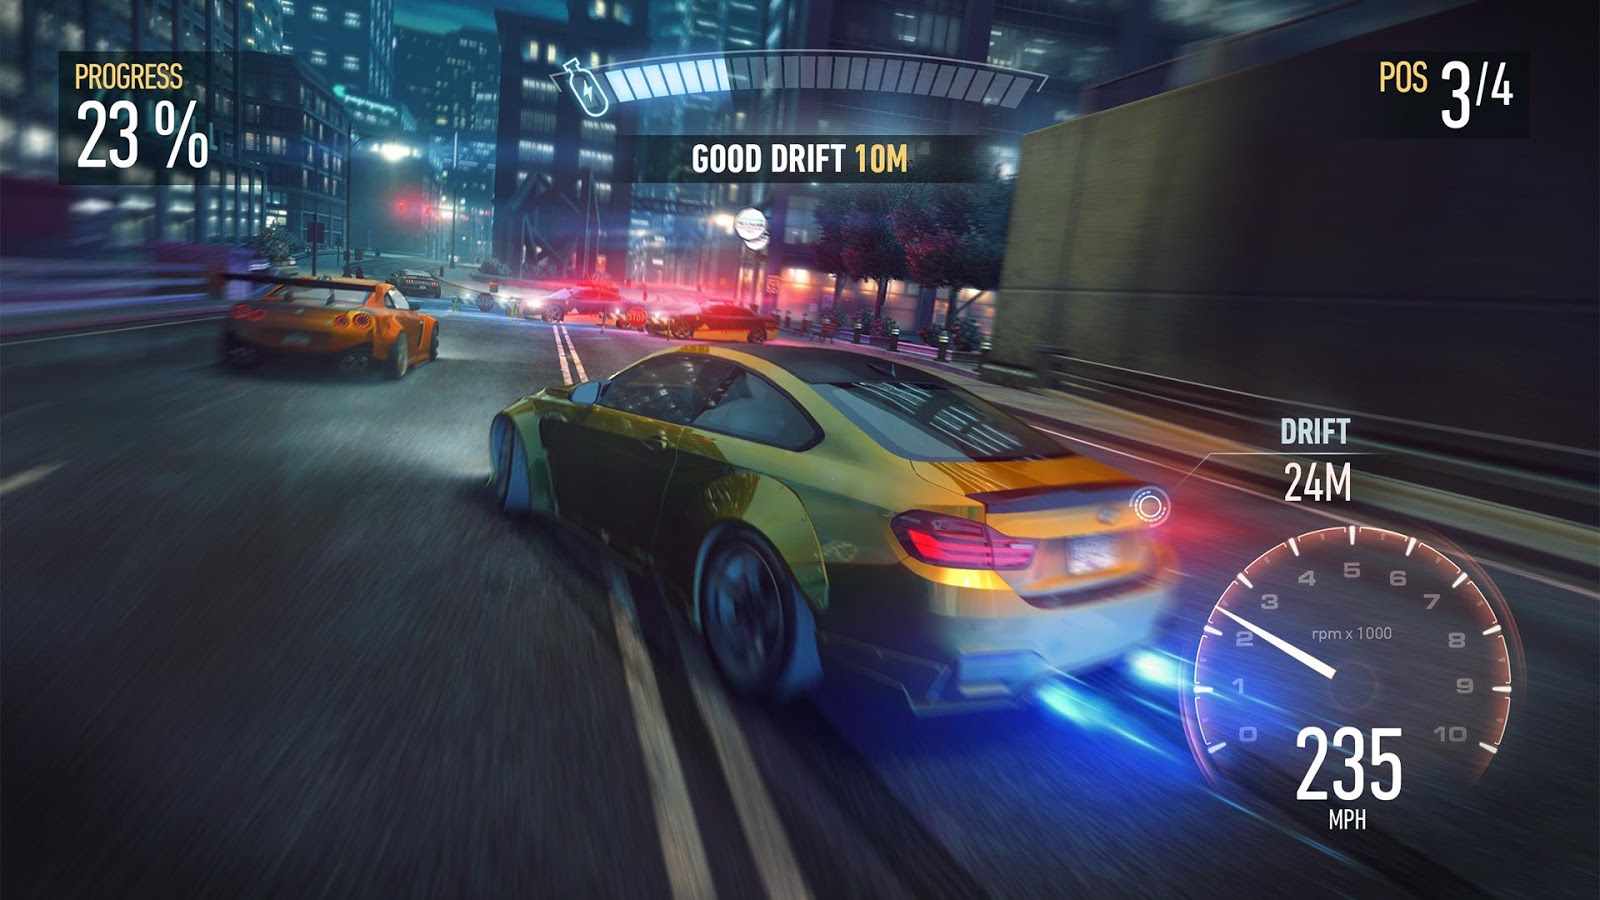 8. Need for Speed